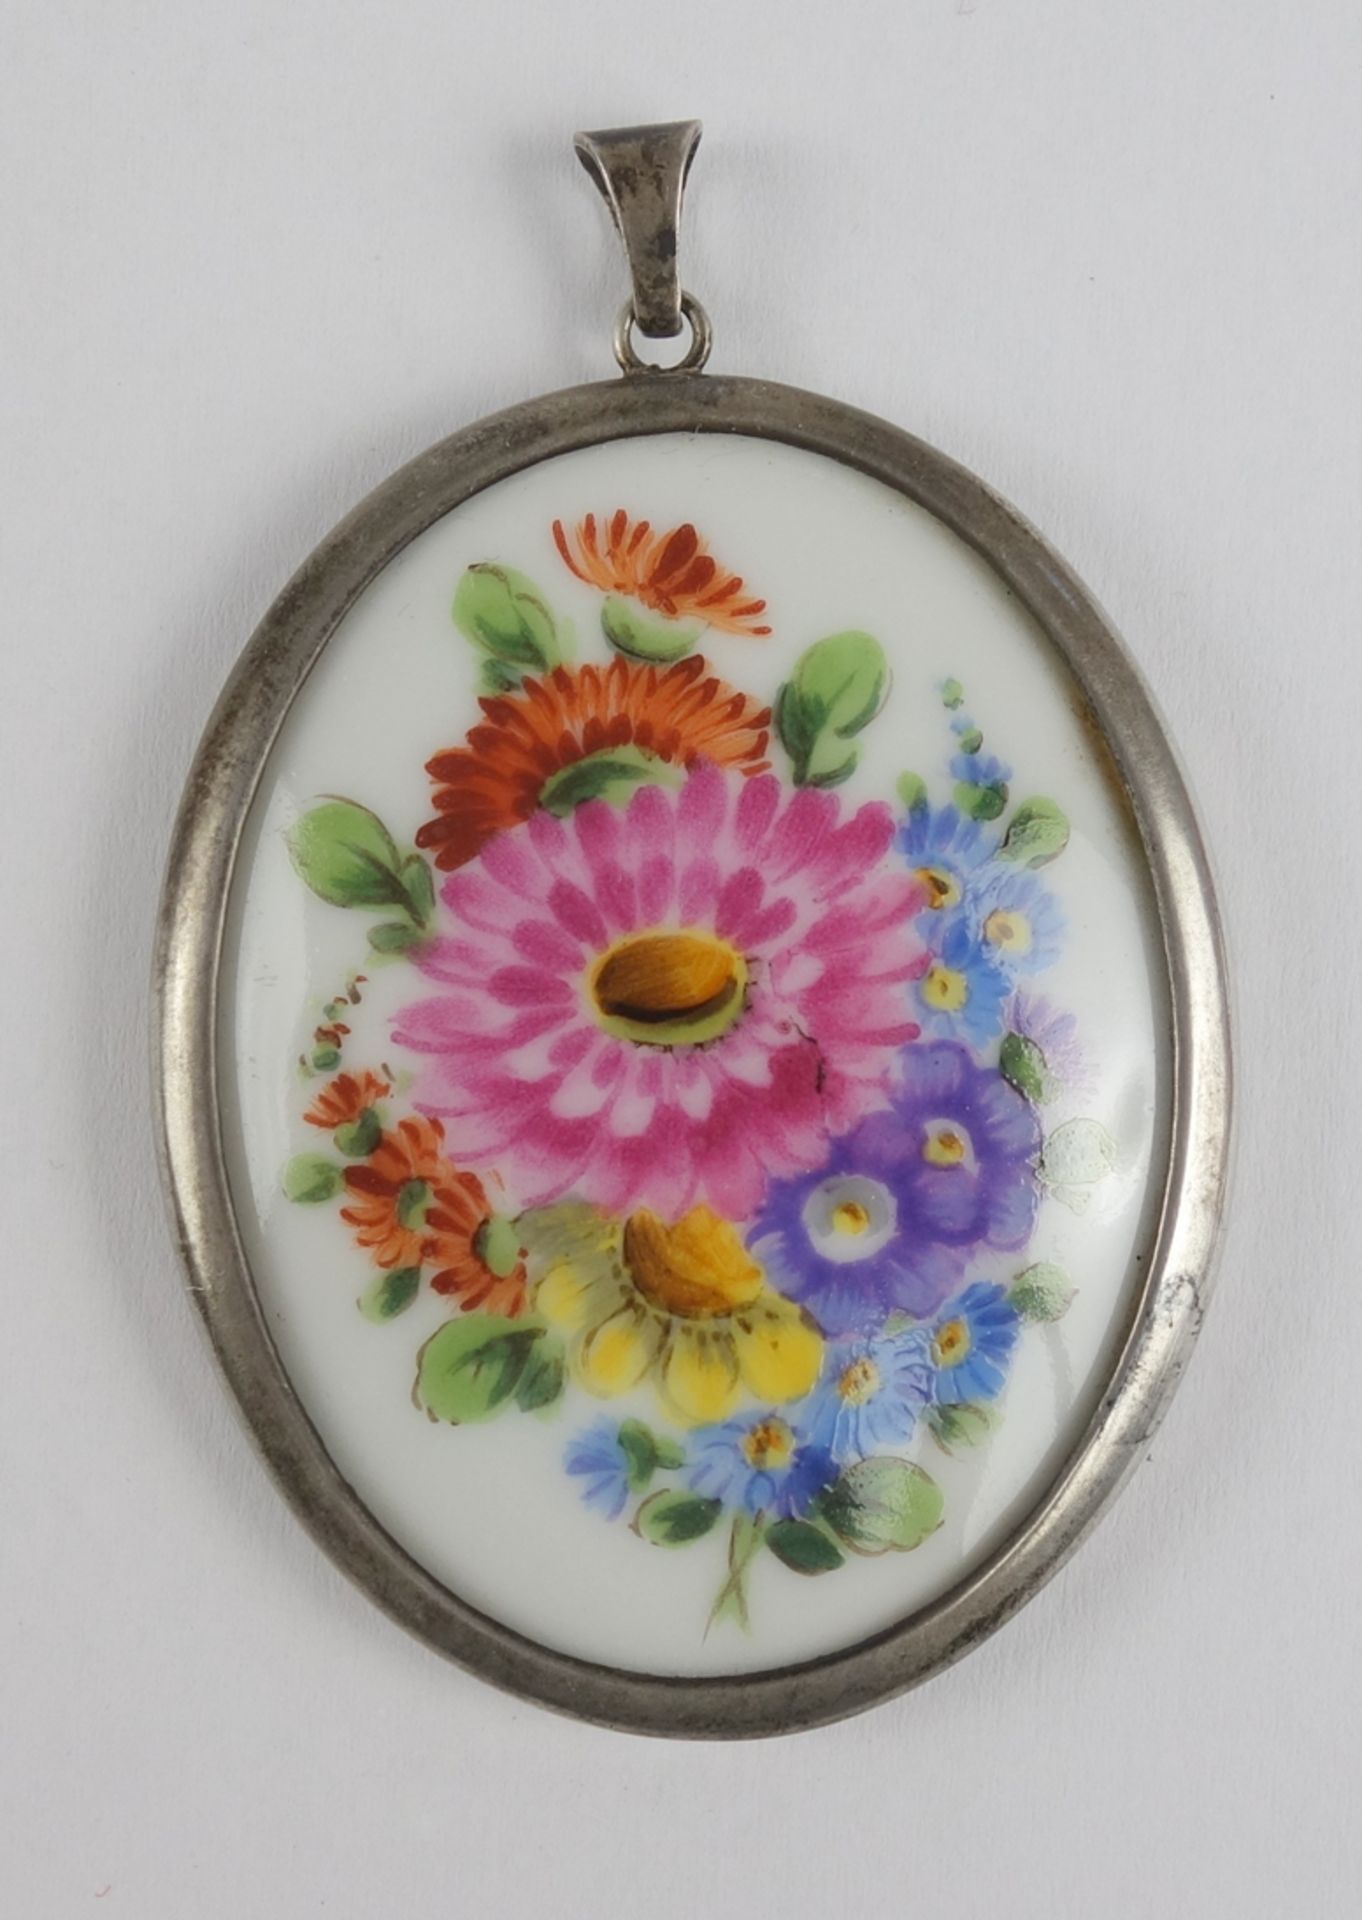 Porcelain pendant with hand painting, 800 silver setting